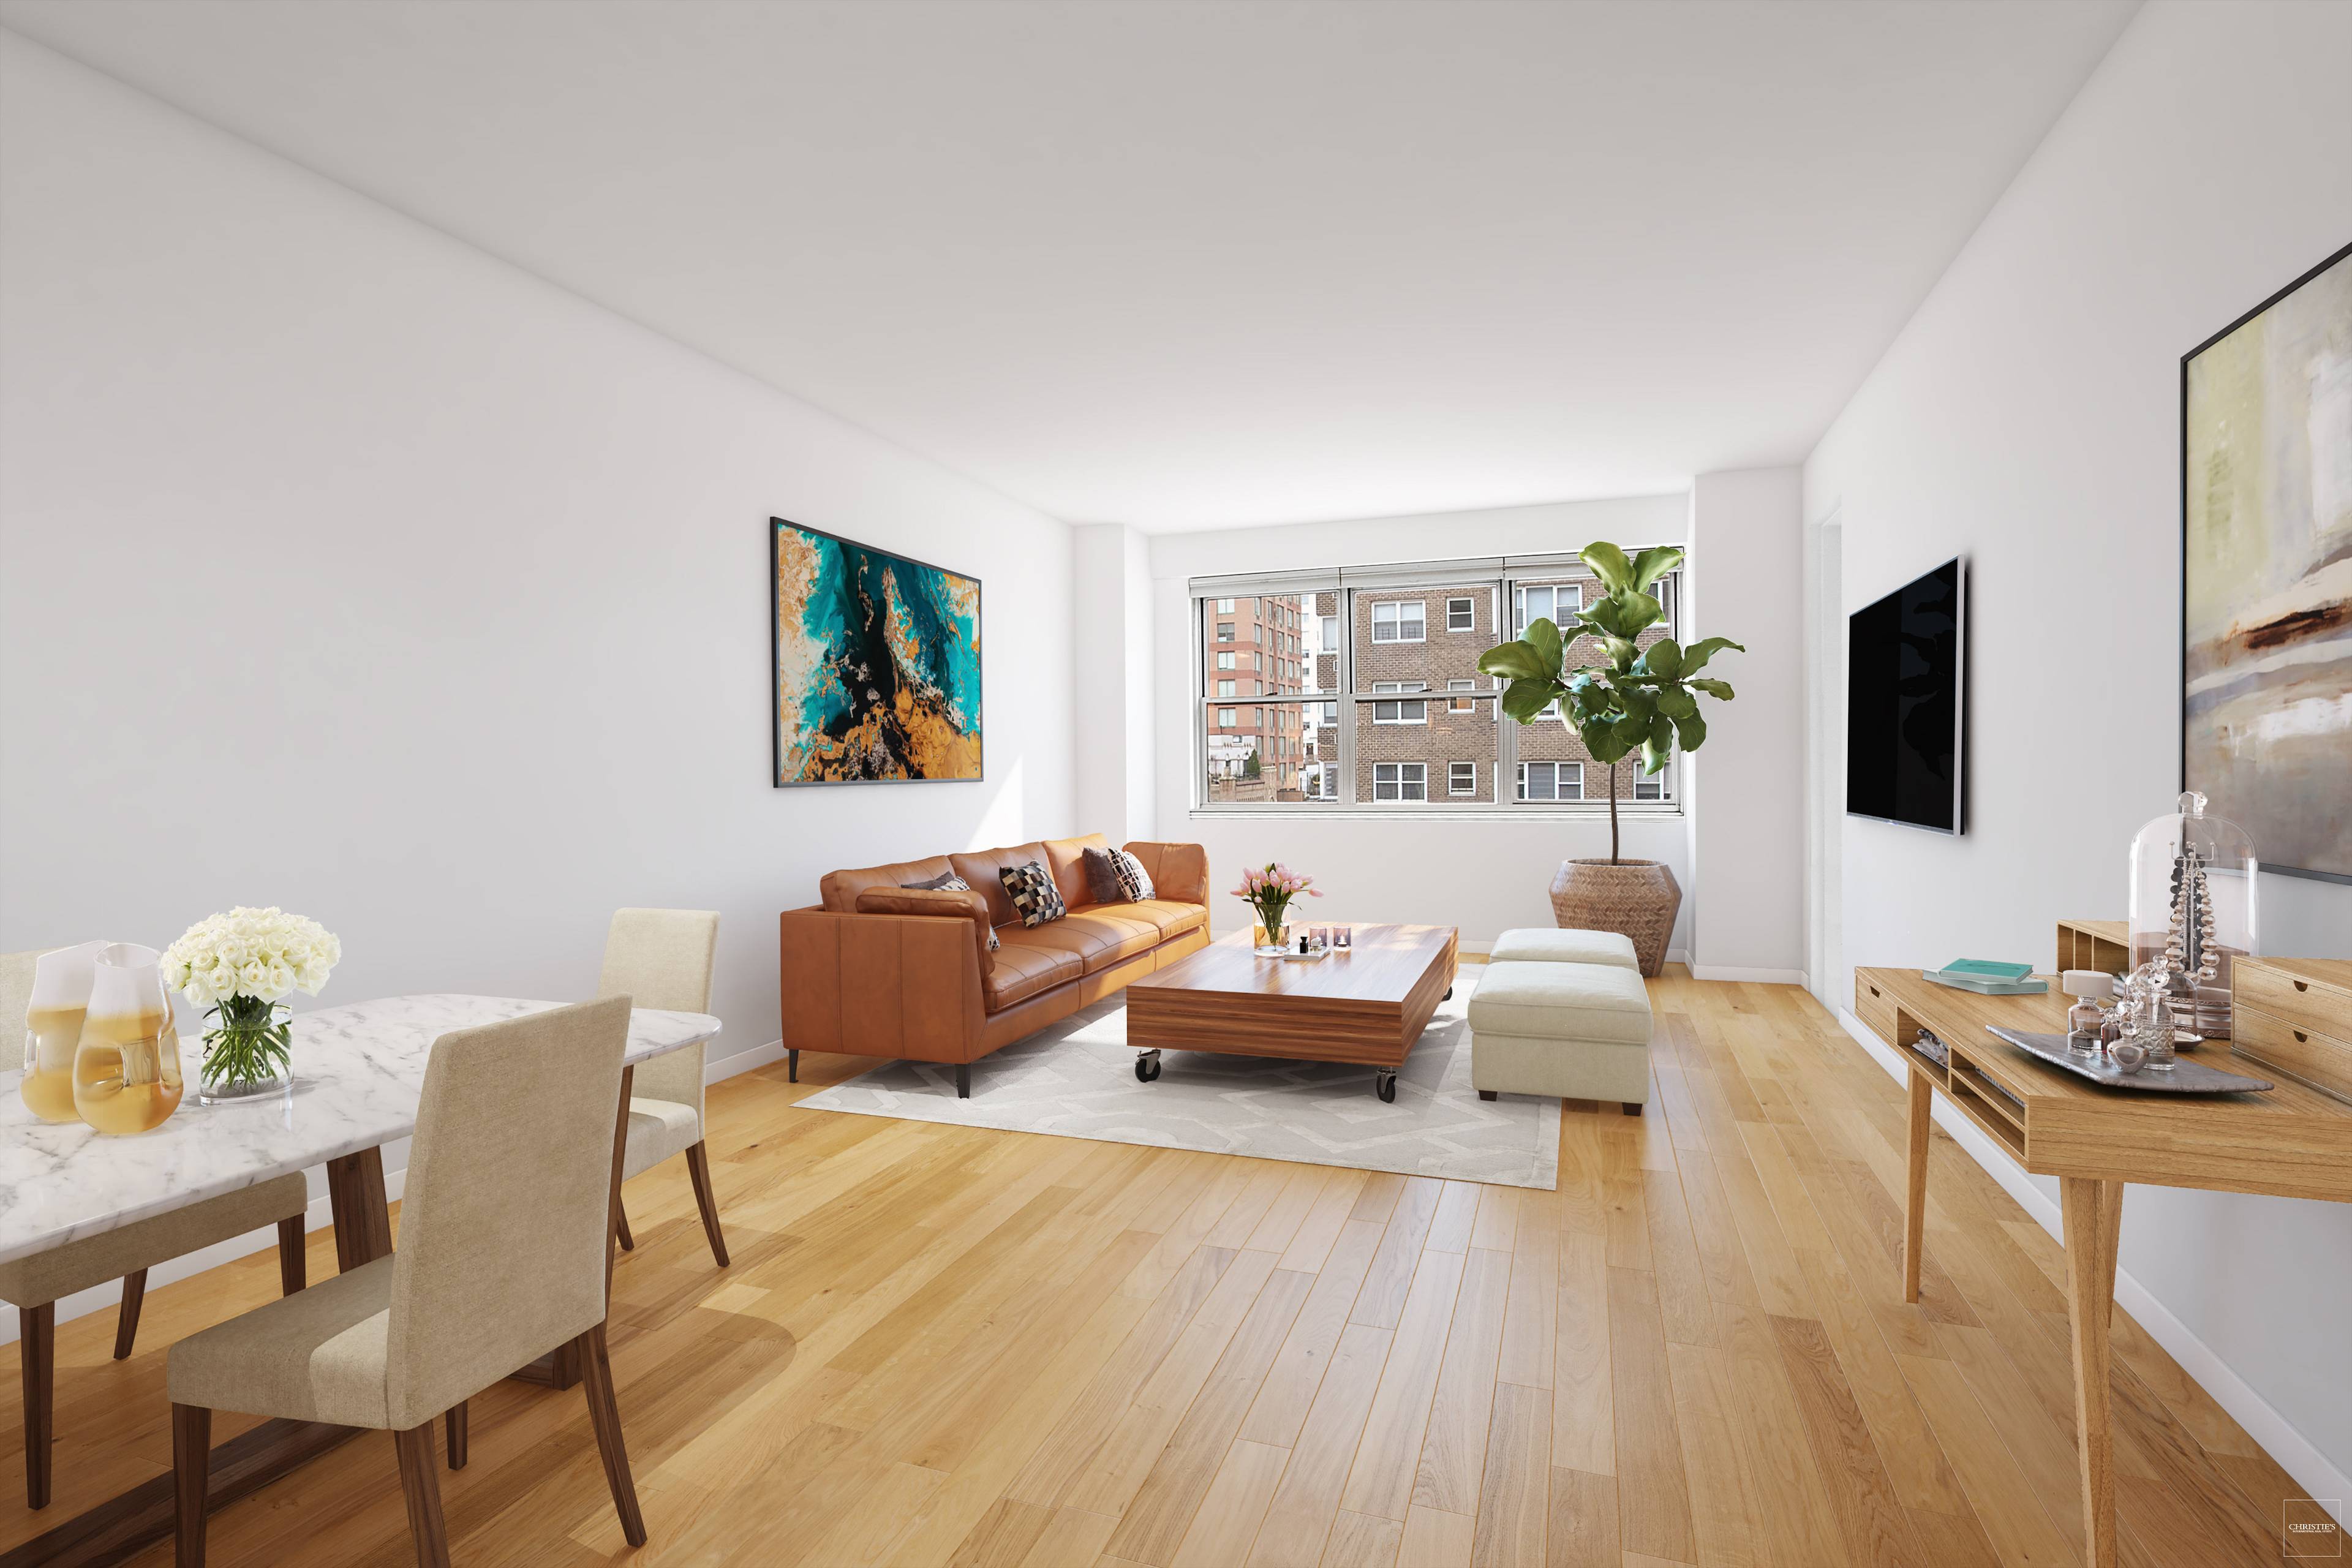 Introducing apartment 10H at 300 East 71 Street, a 2 bedroom, 2 bath apartment with 1200 square feet of living space, plus a spacious private balcony.